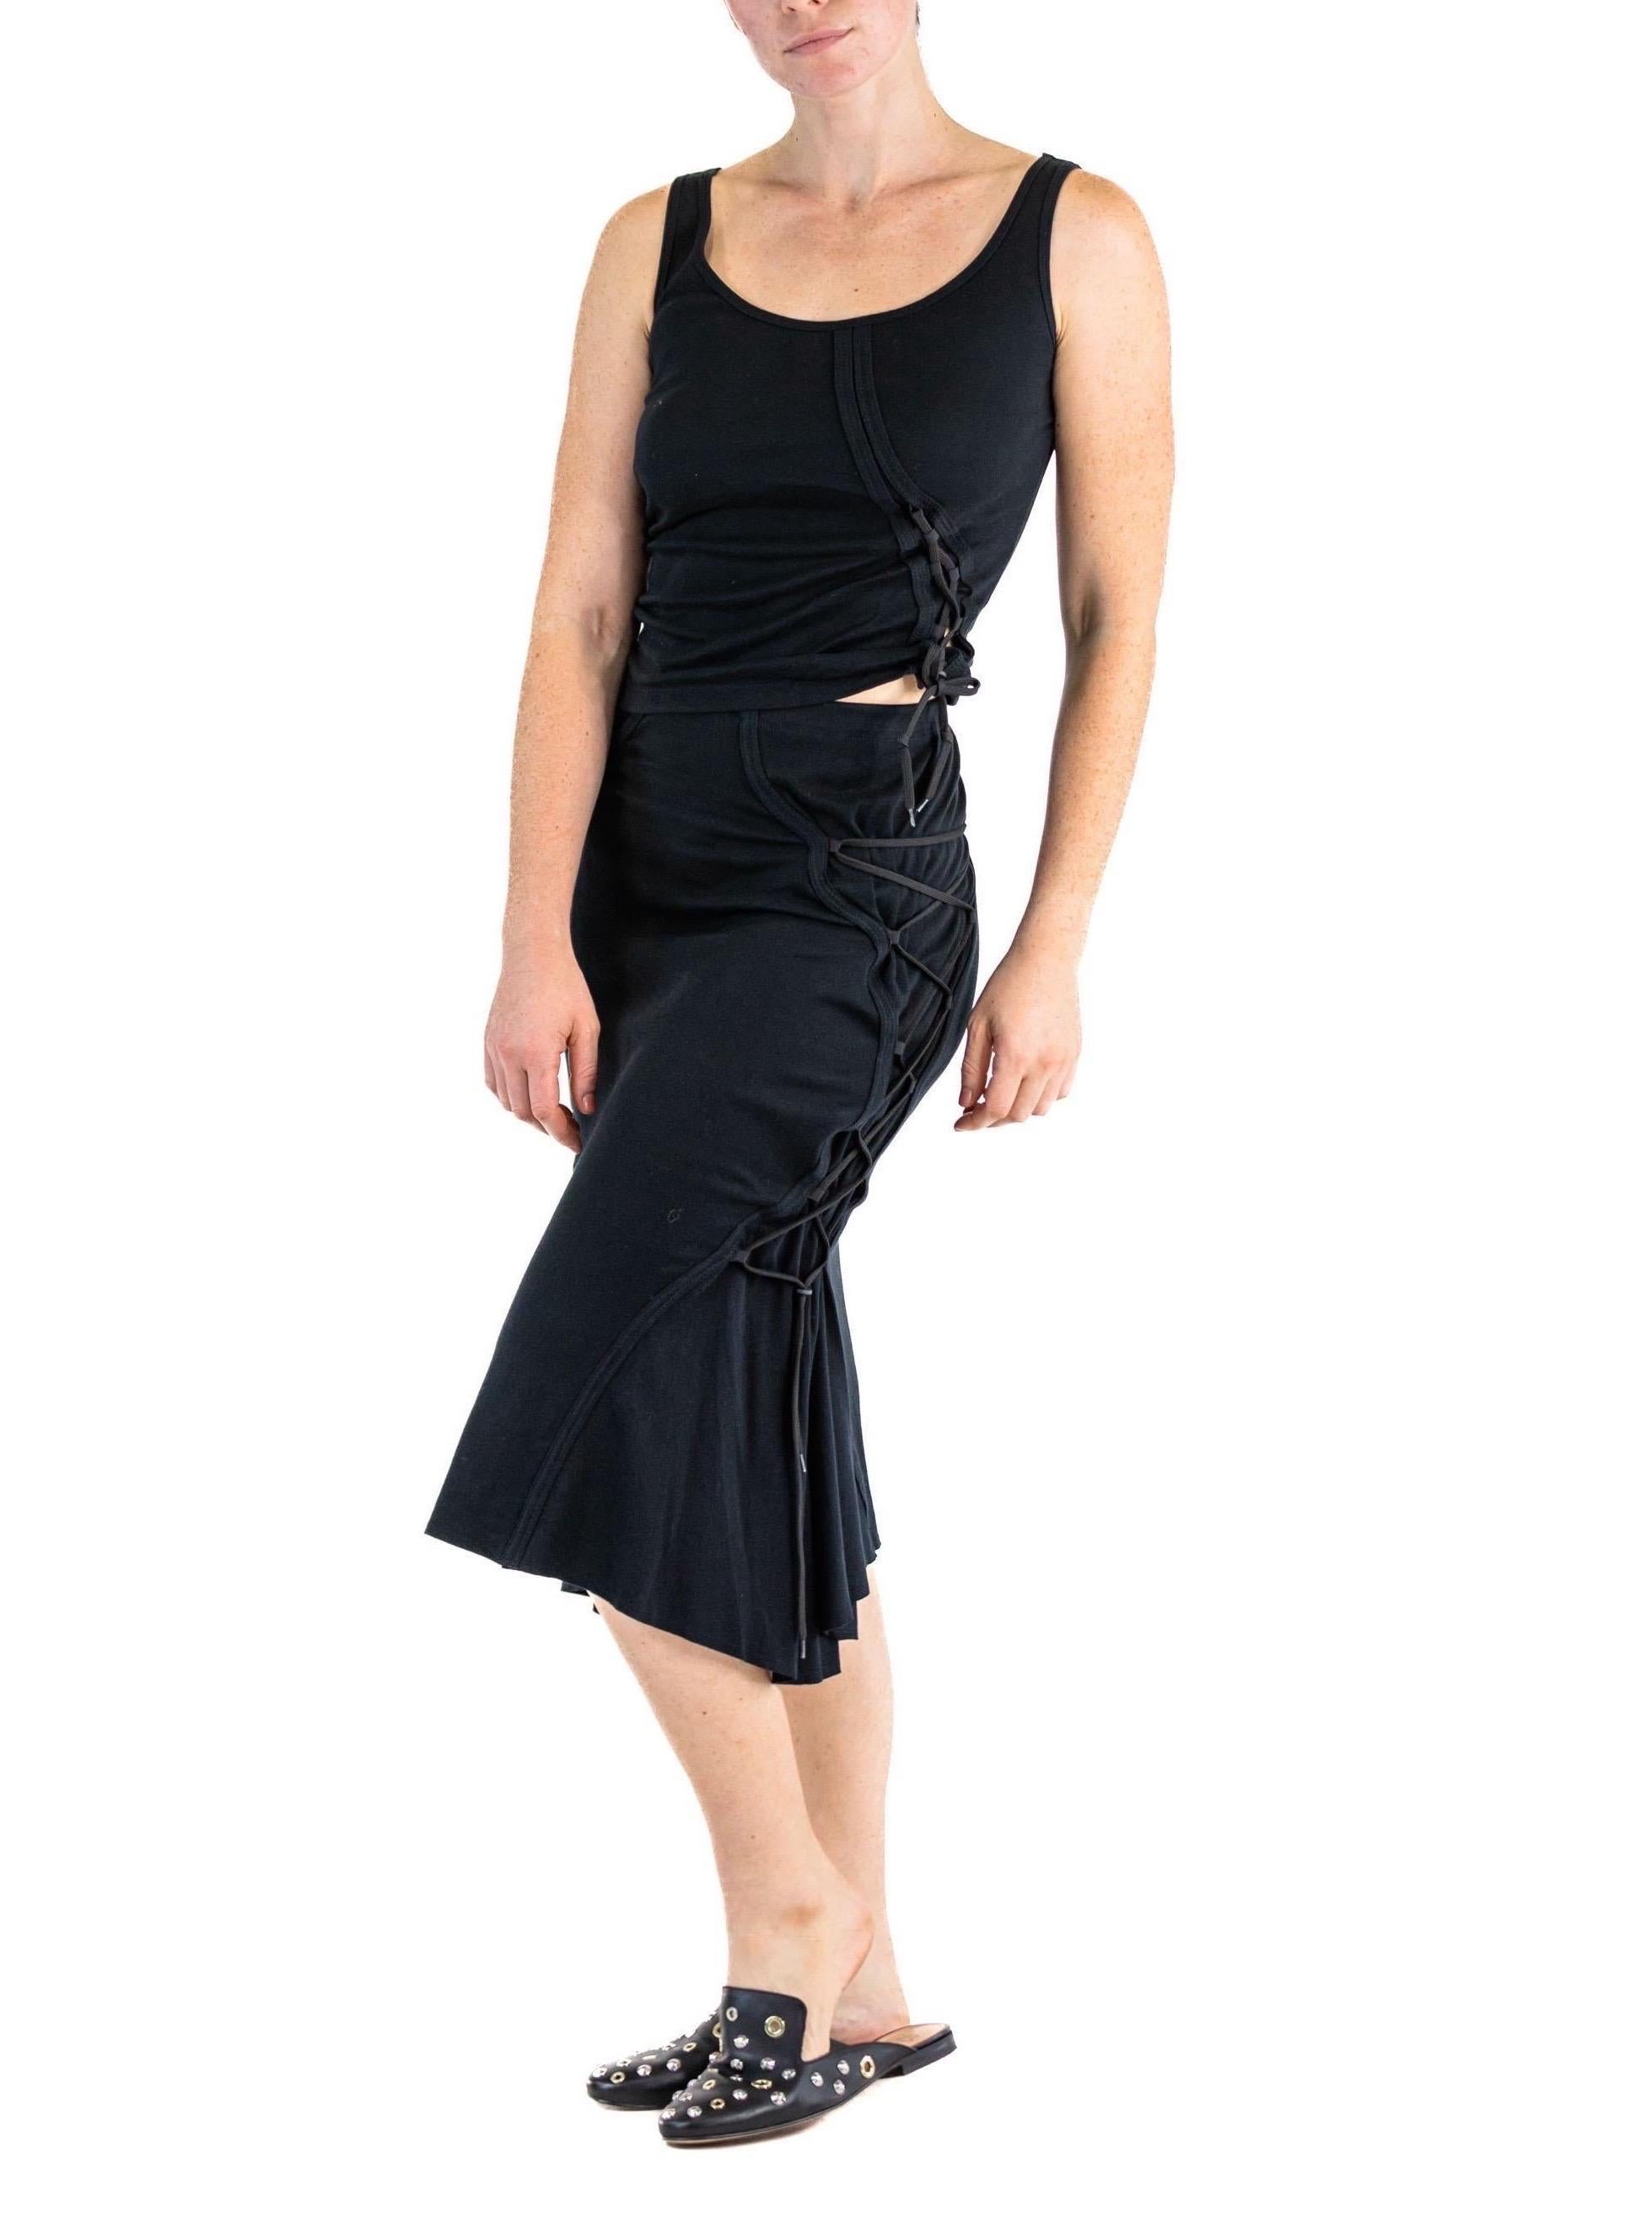 1990S ISSEY MIYAKES Black Cotton Blend Stretch Top & Skirt Ensemble With Lace U For Sale 1